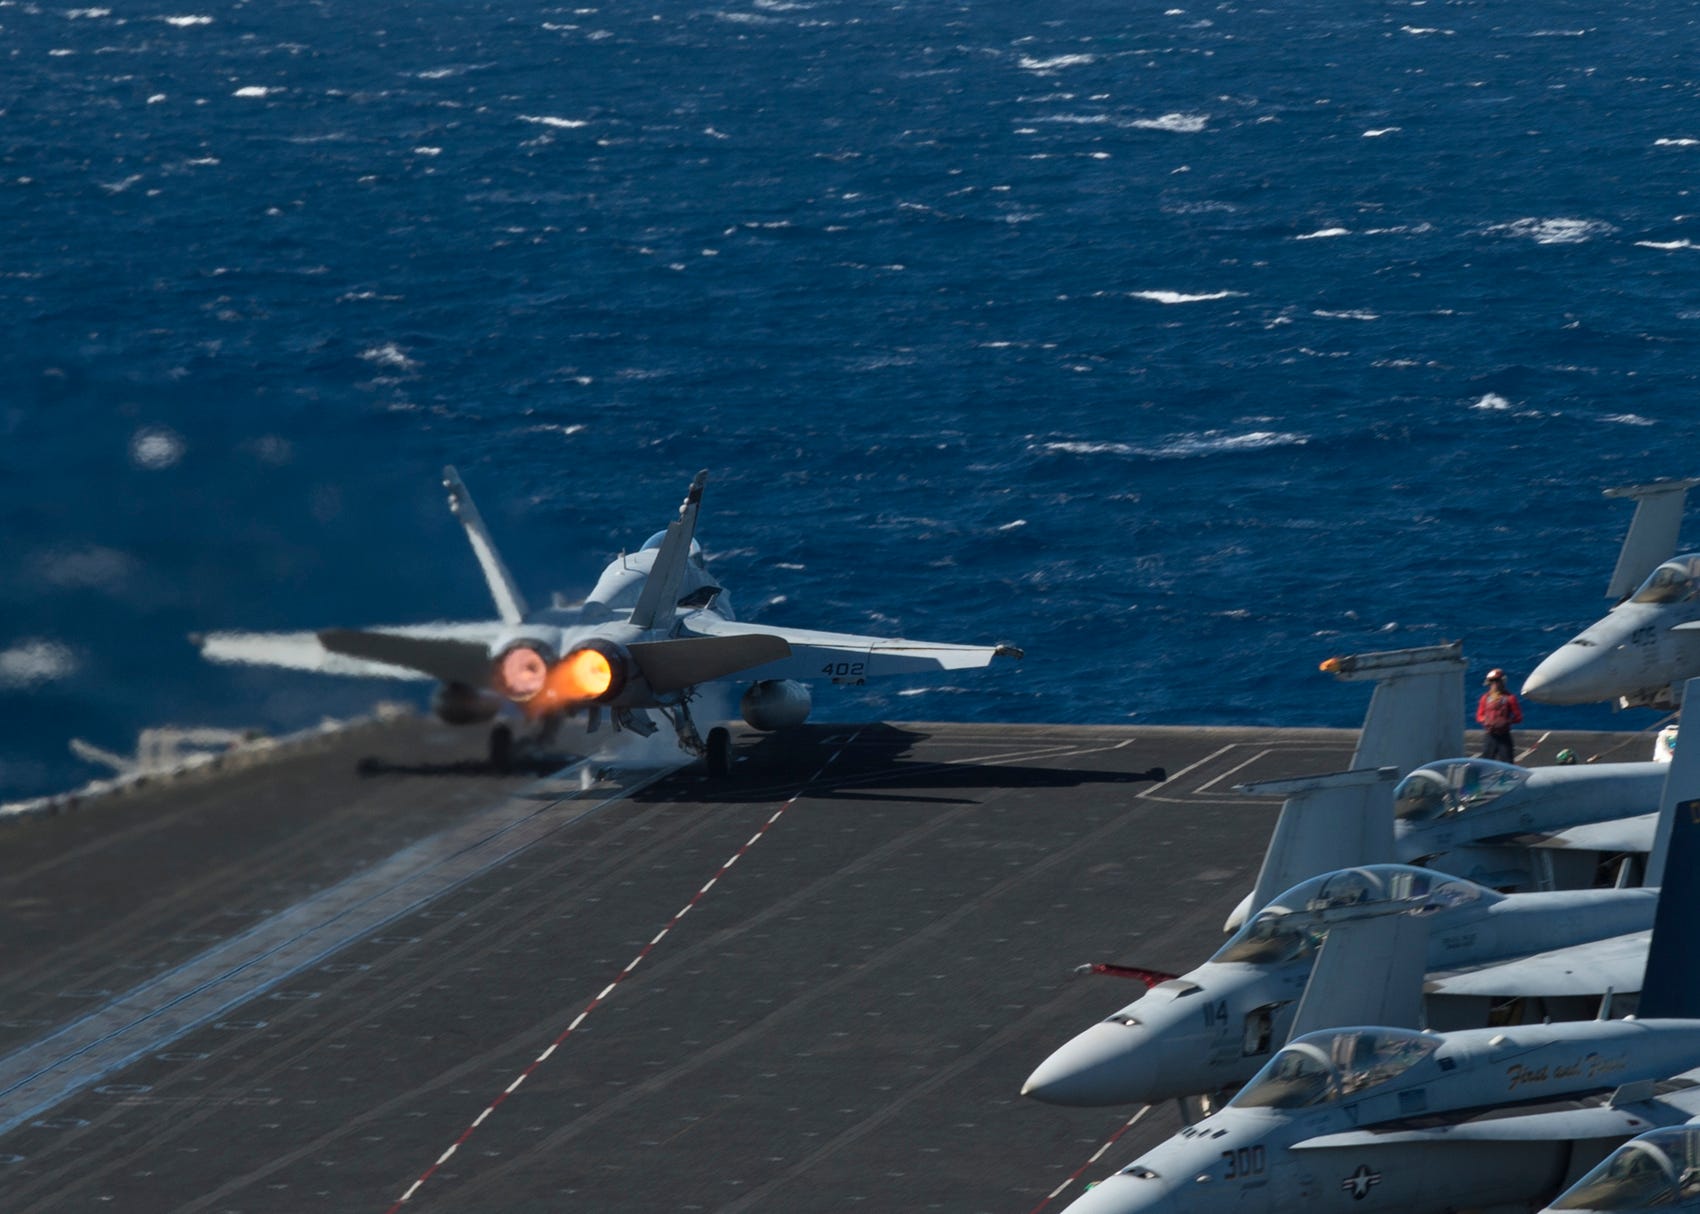 150504-N-KB426-066 INDIAN OCEAN (May 4, 2015) A Strike Fighter Squadron (VFA) 94 “Mighty Shrikes” F/A-18C Hornet launches from the aircraft carrier USS Carl Vinson (CVN 70) flight deck. Carl Vinson and its embarked air wing, Carrier Air Wing (CVW) 17, are deployed to the 7th Fleet area of operations supporting security and stability in the Indo-Asia-Pacific region. (U.S. Navy photo by Mass Communication Specialist 3rd Class James Vazquez/Released)